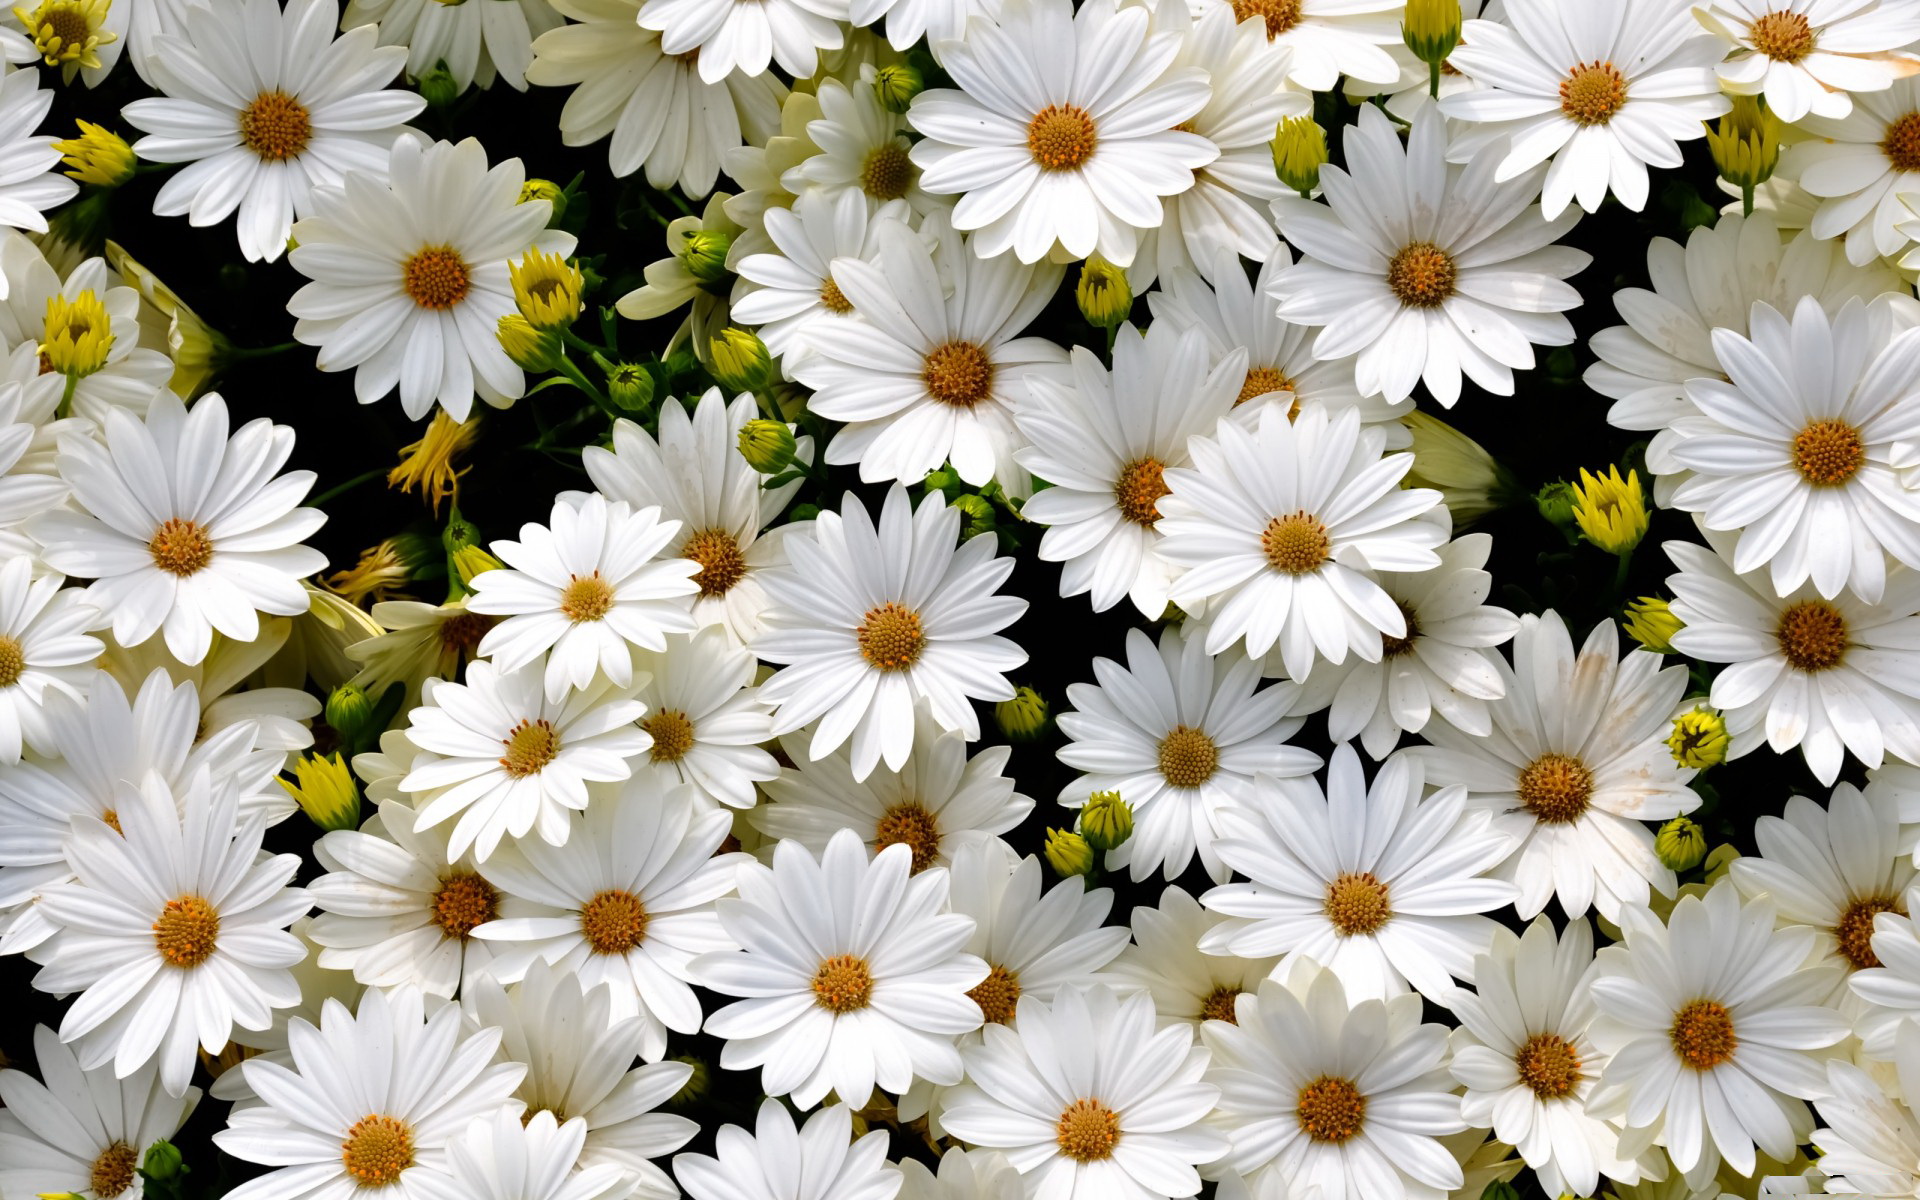 Daisy HD download for free